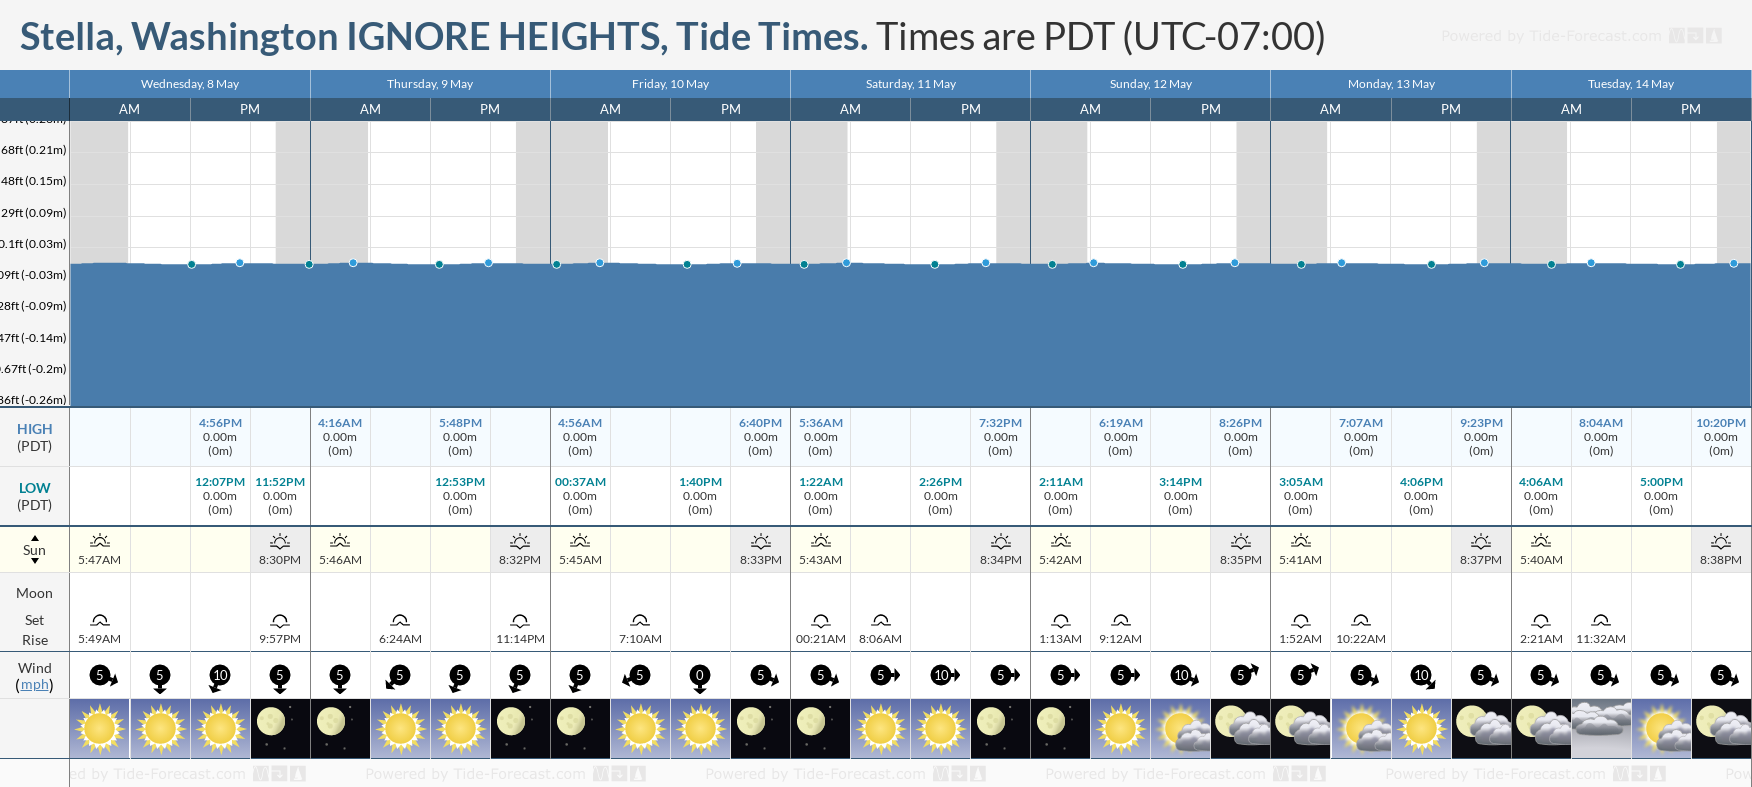 Stella, Washington IGNORE HEIGHTS Tide Chart including high and low tide tide times for the next 7 days